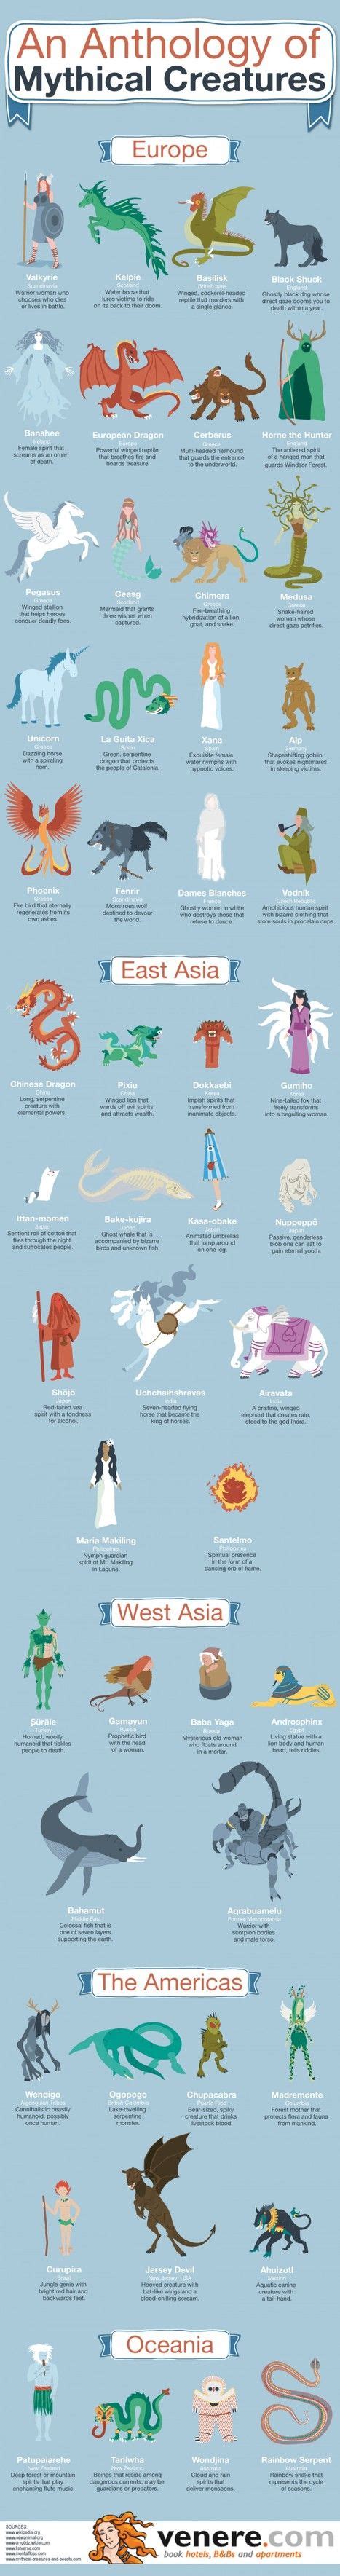 An Anthology Of Mythical Creatures Infographic Digital Delights